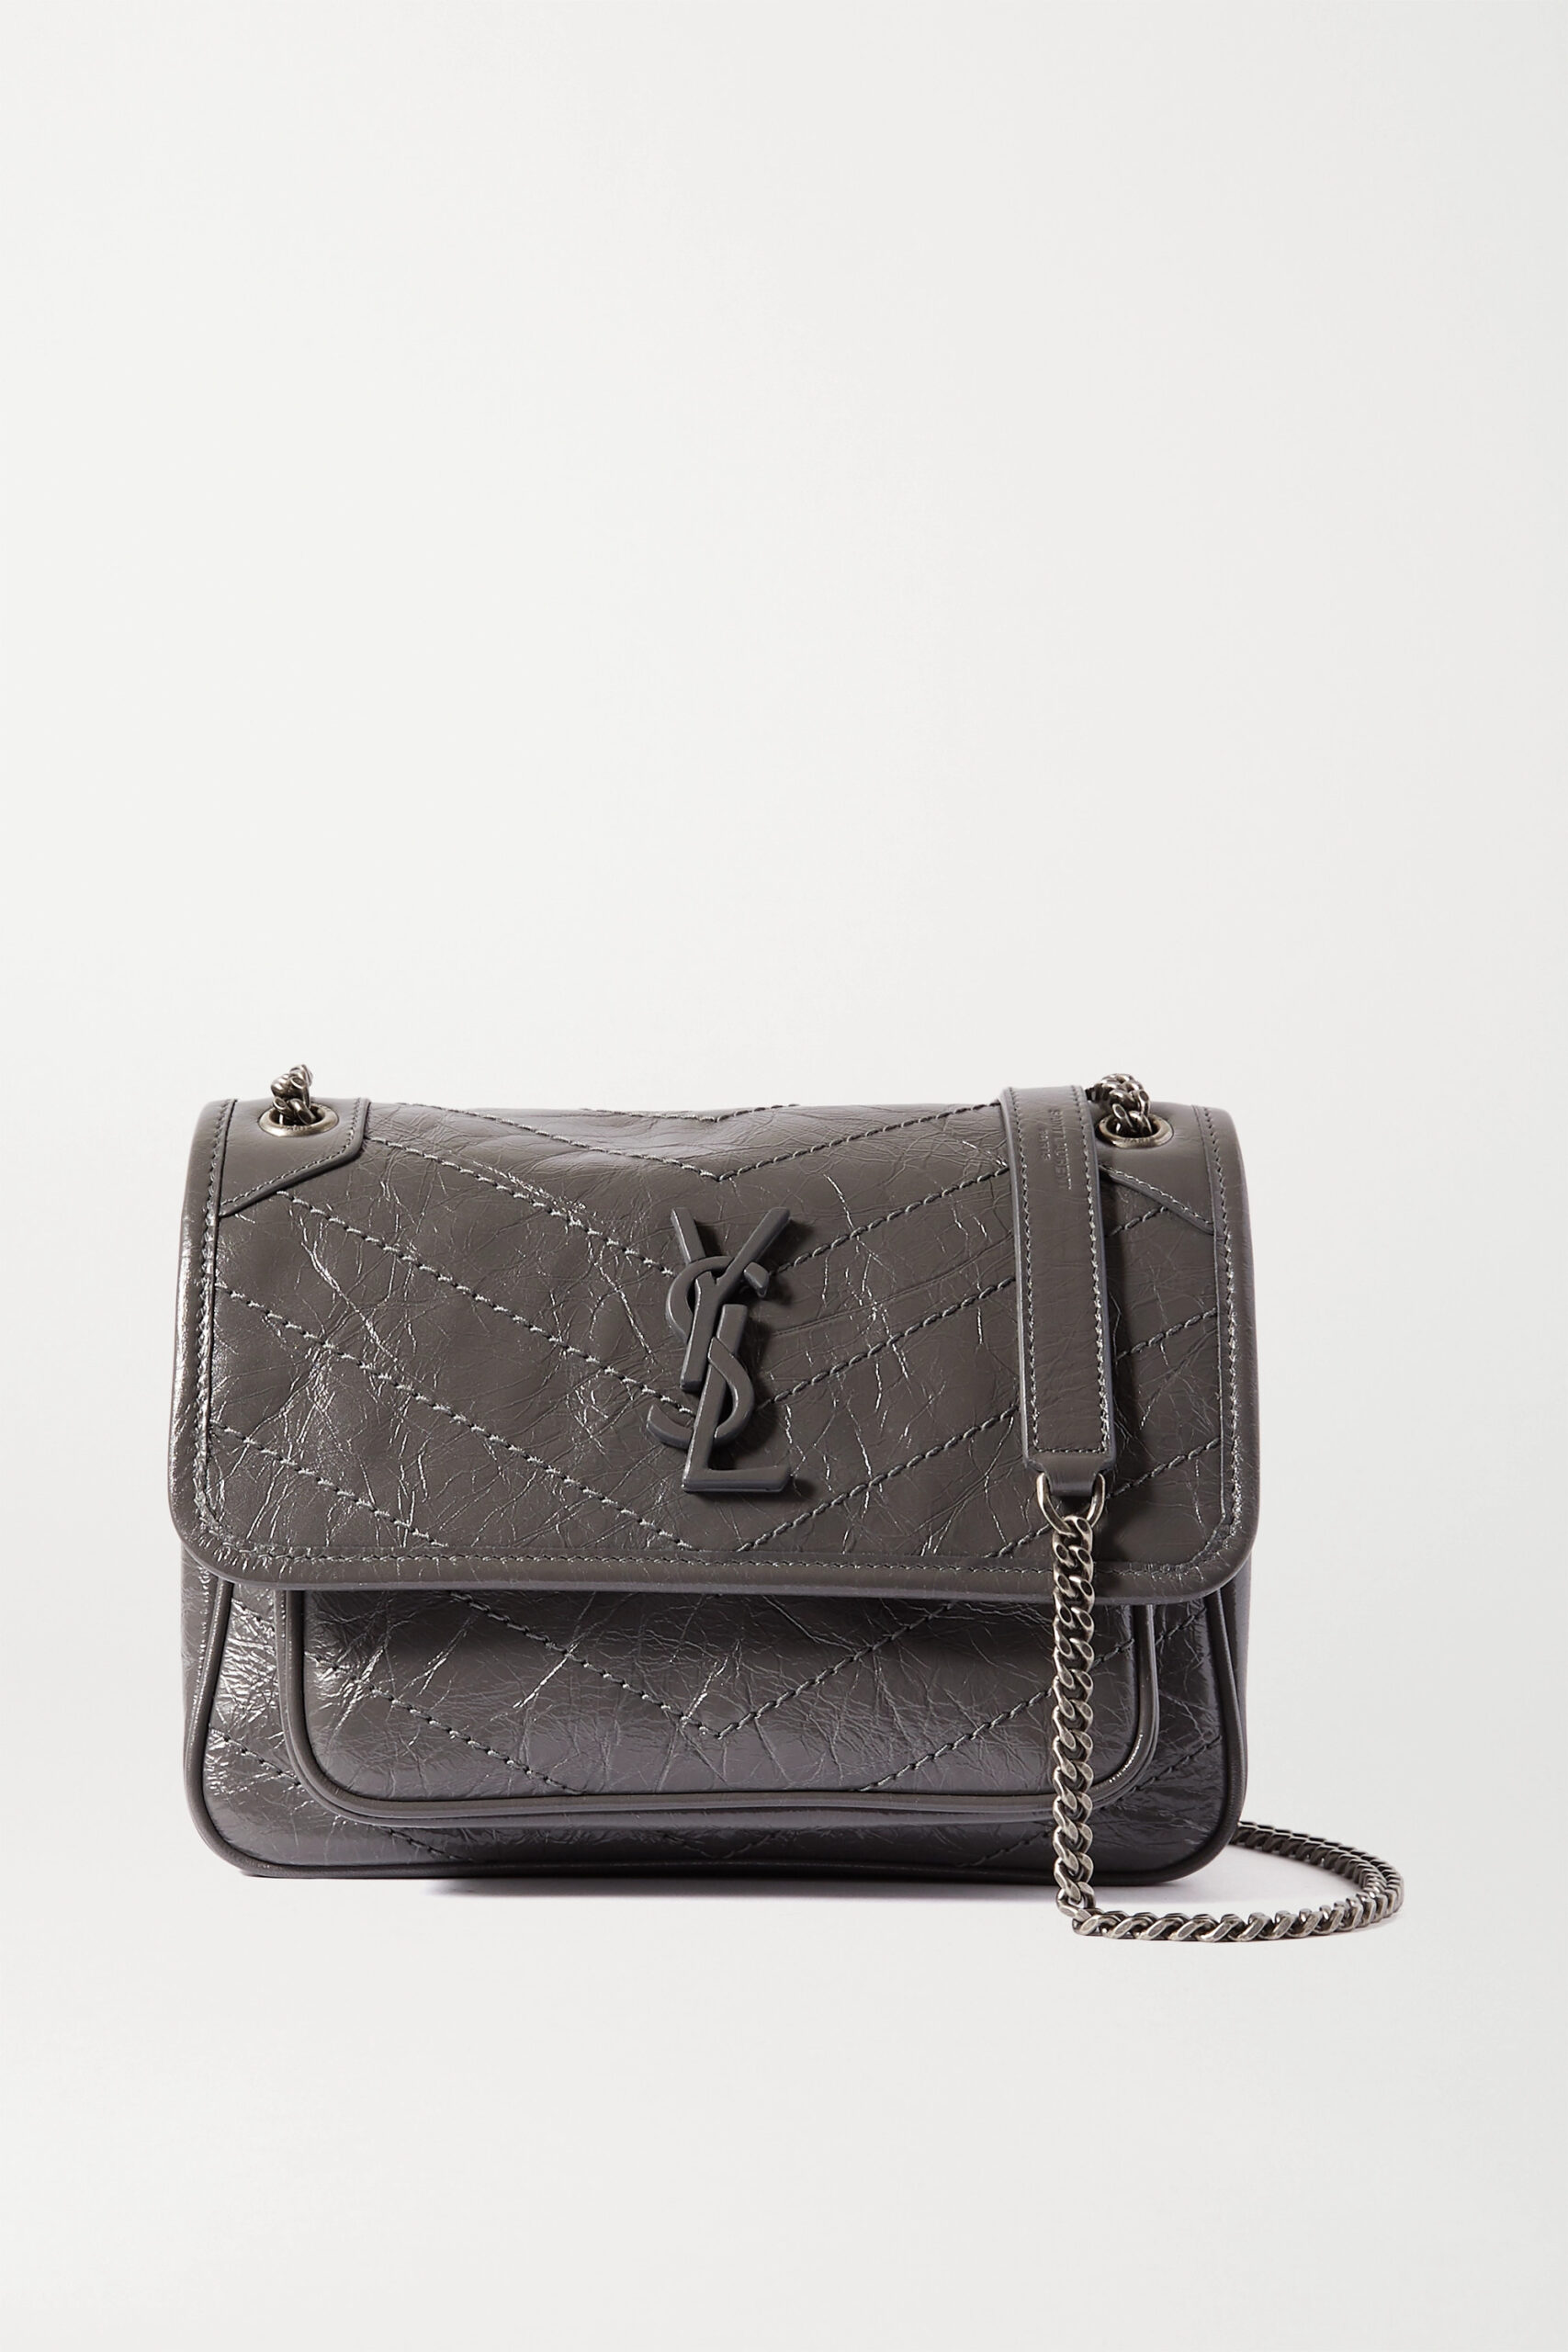 Saint Laurent Uptown Baby Textured-leather Pouch - Black - One Size